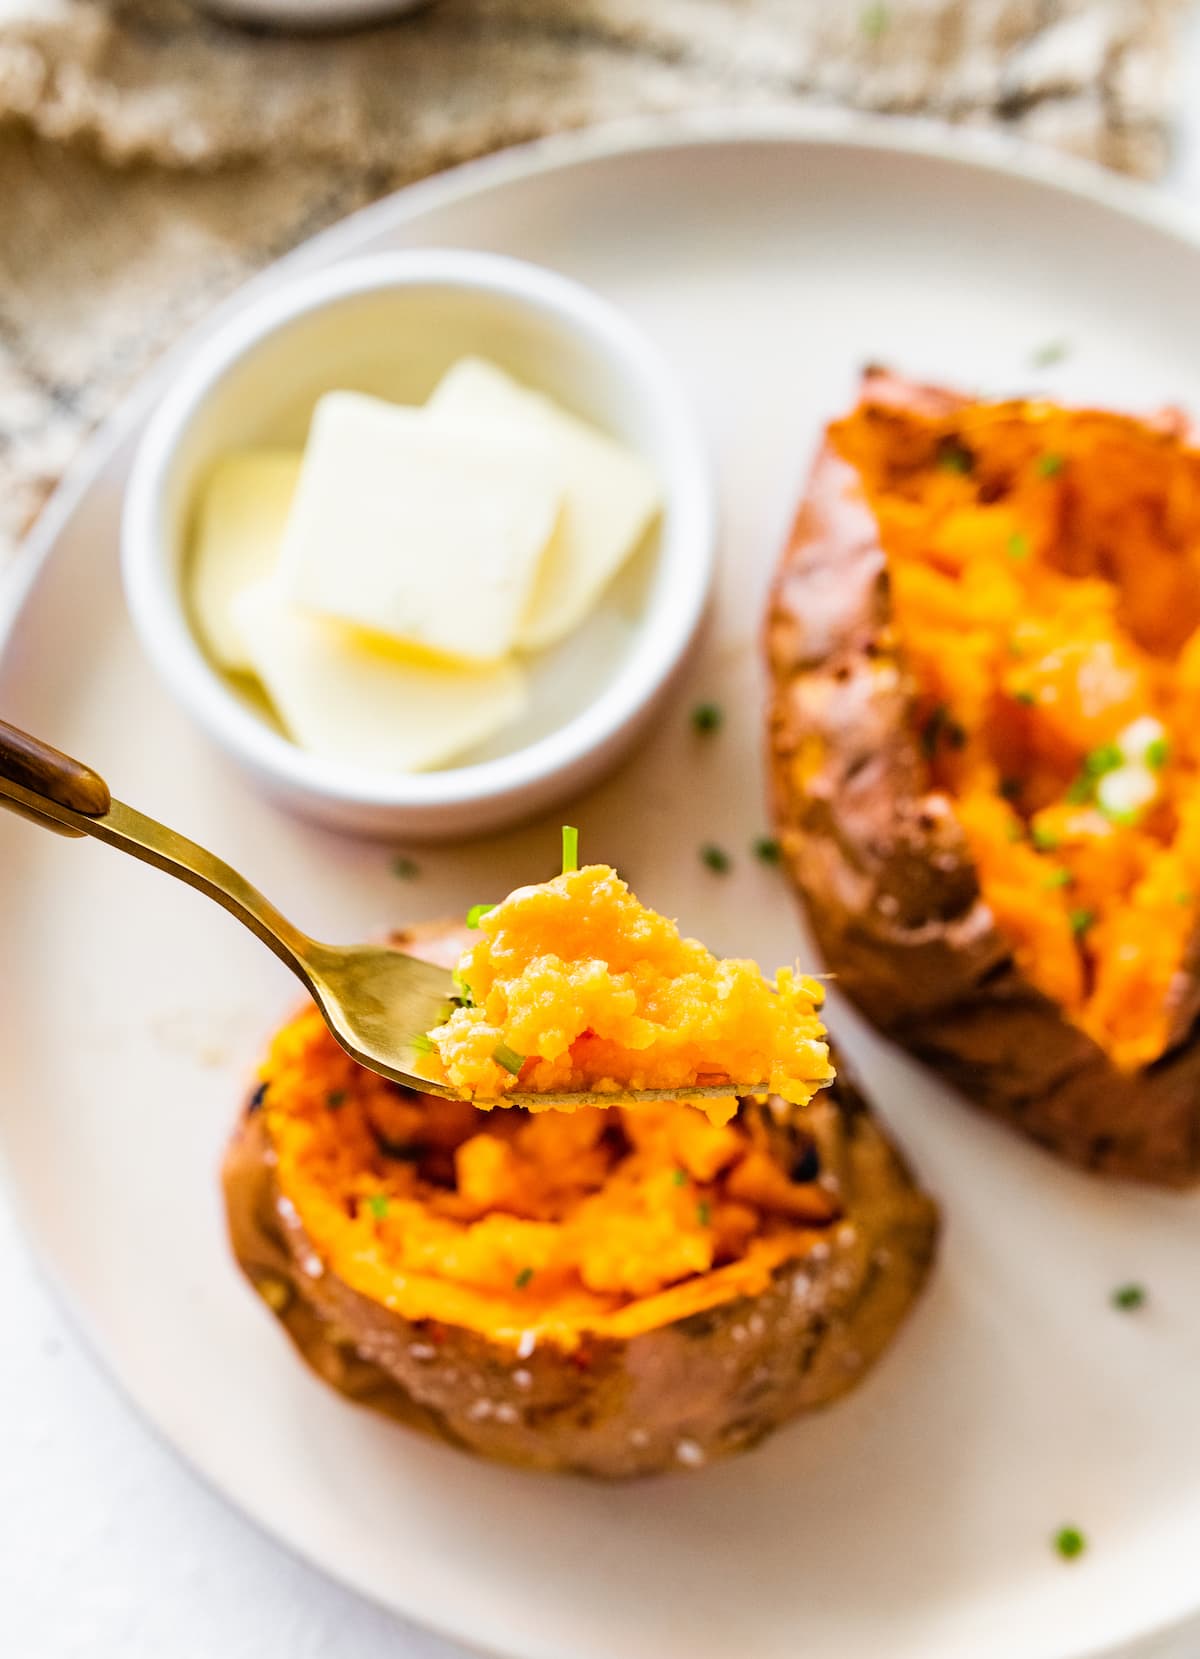 A fork holding a bite size piece of sweet potato above a plate with two baked sweet potatoes on it.